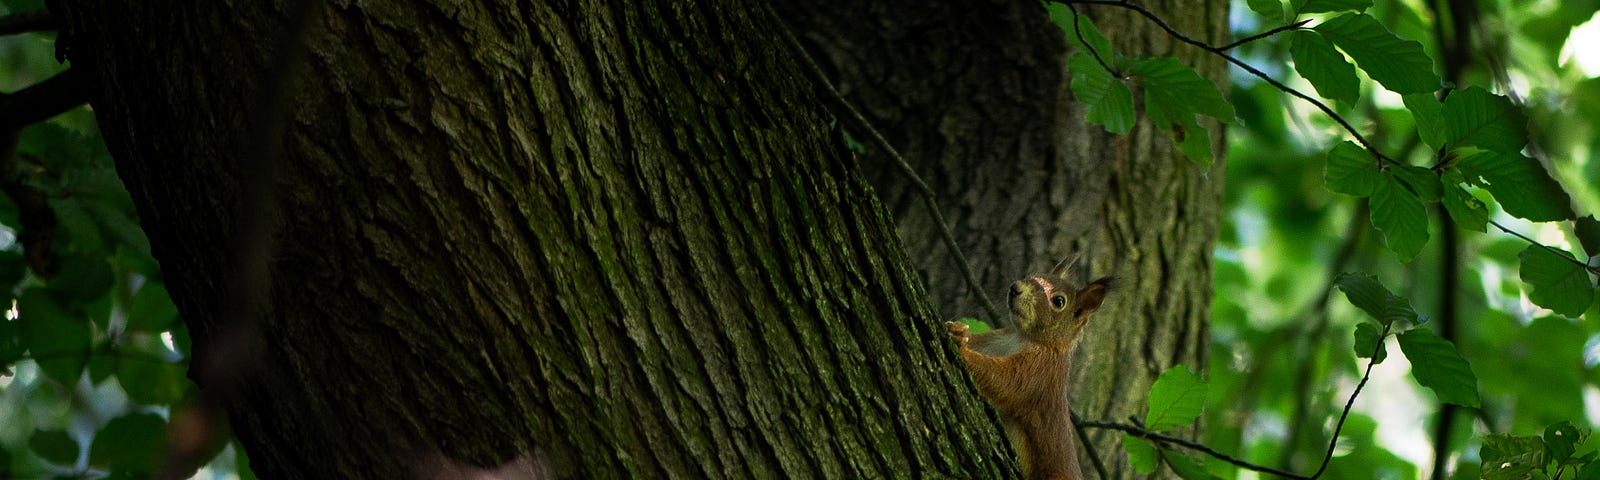 Up goes the Squirrel. Oberhausen, Germany, September 24, 2023.